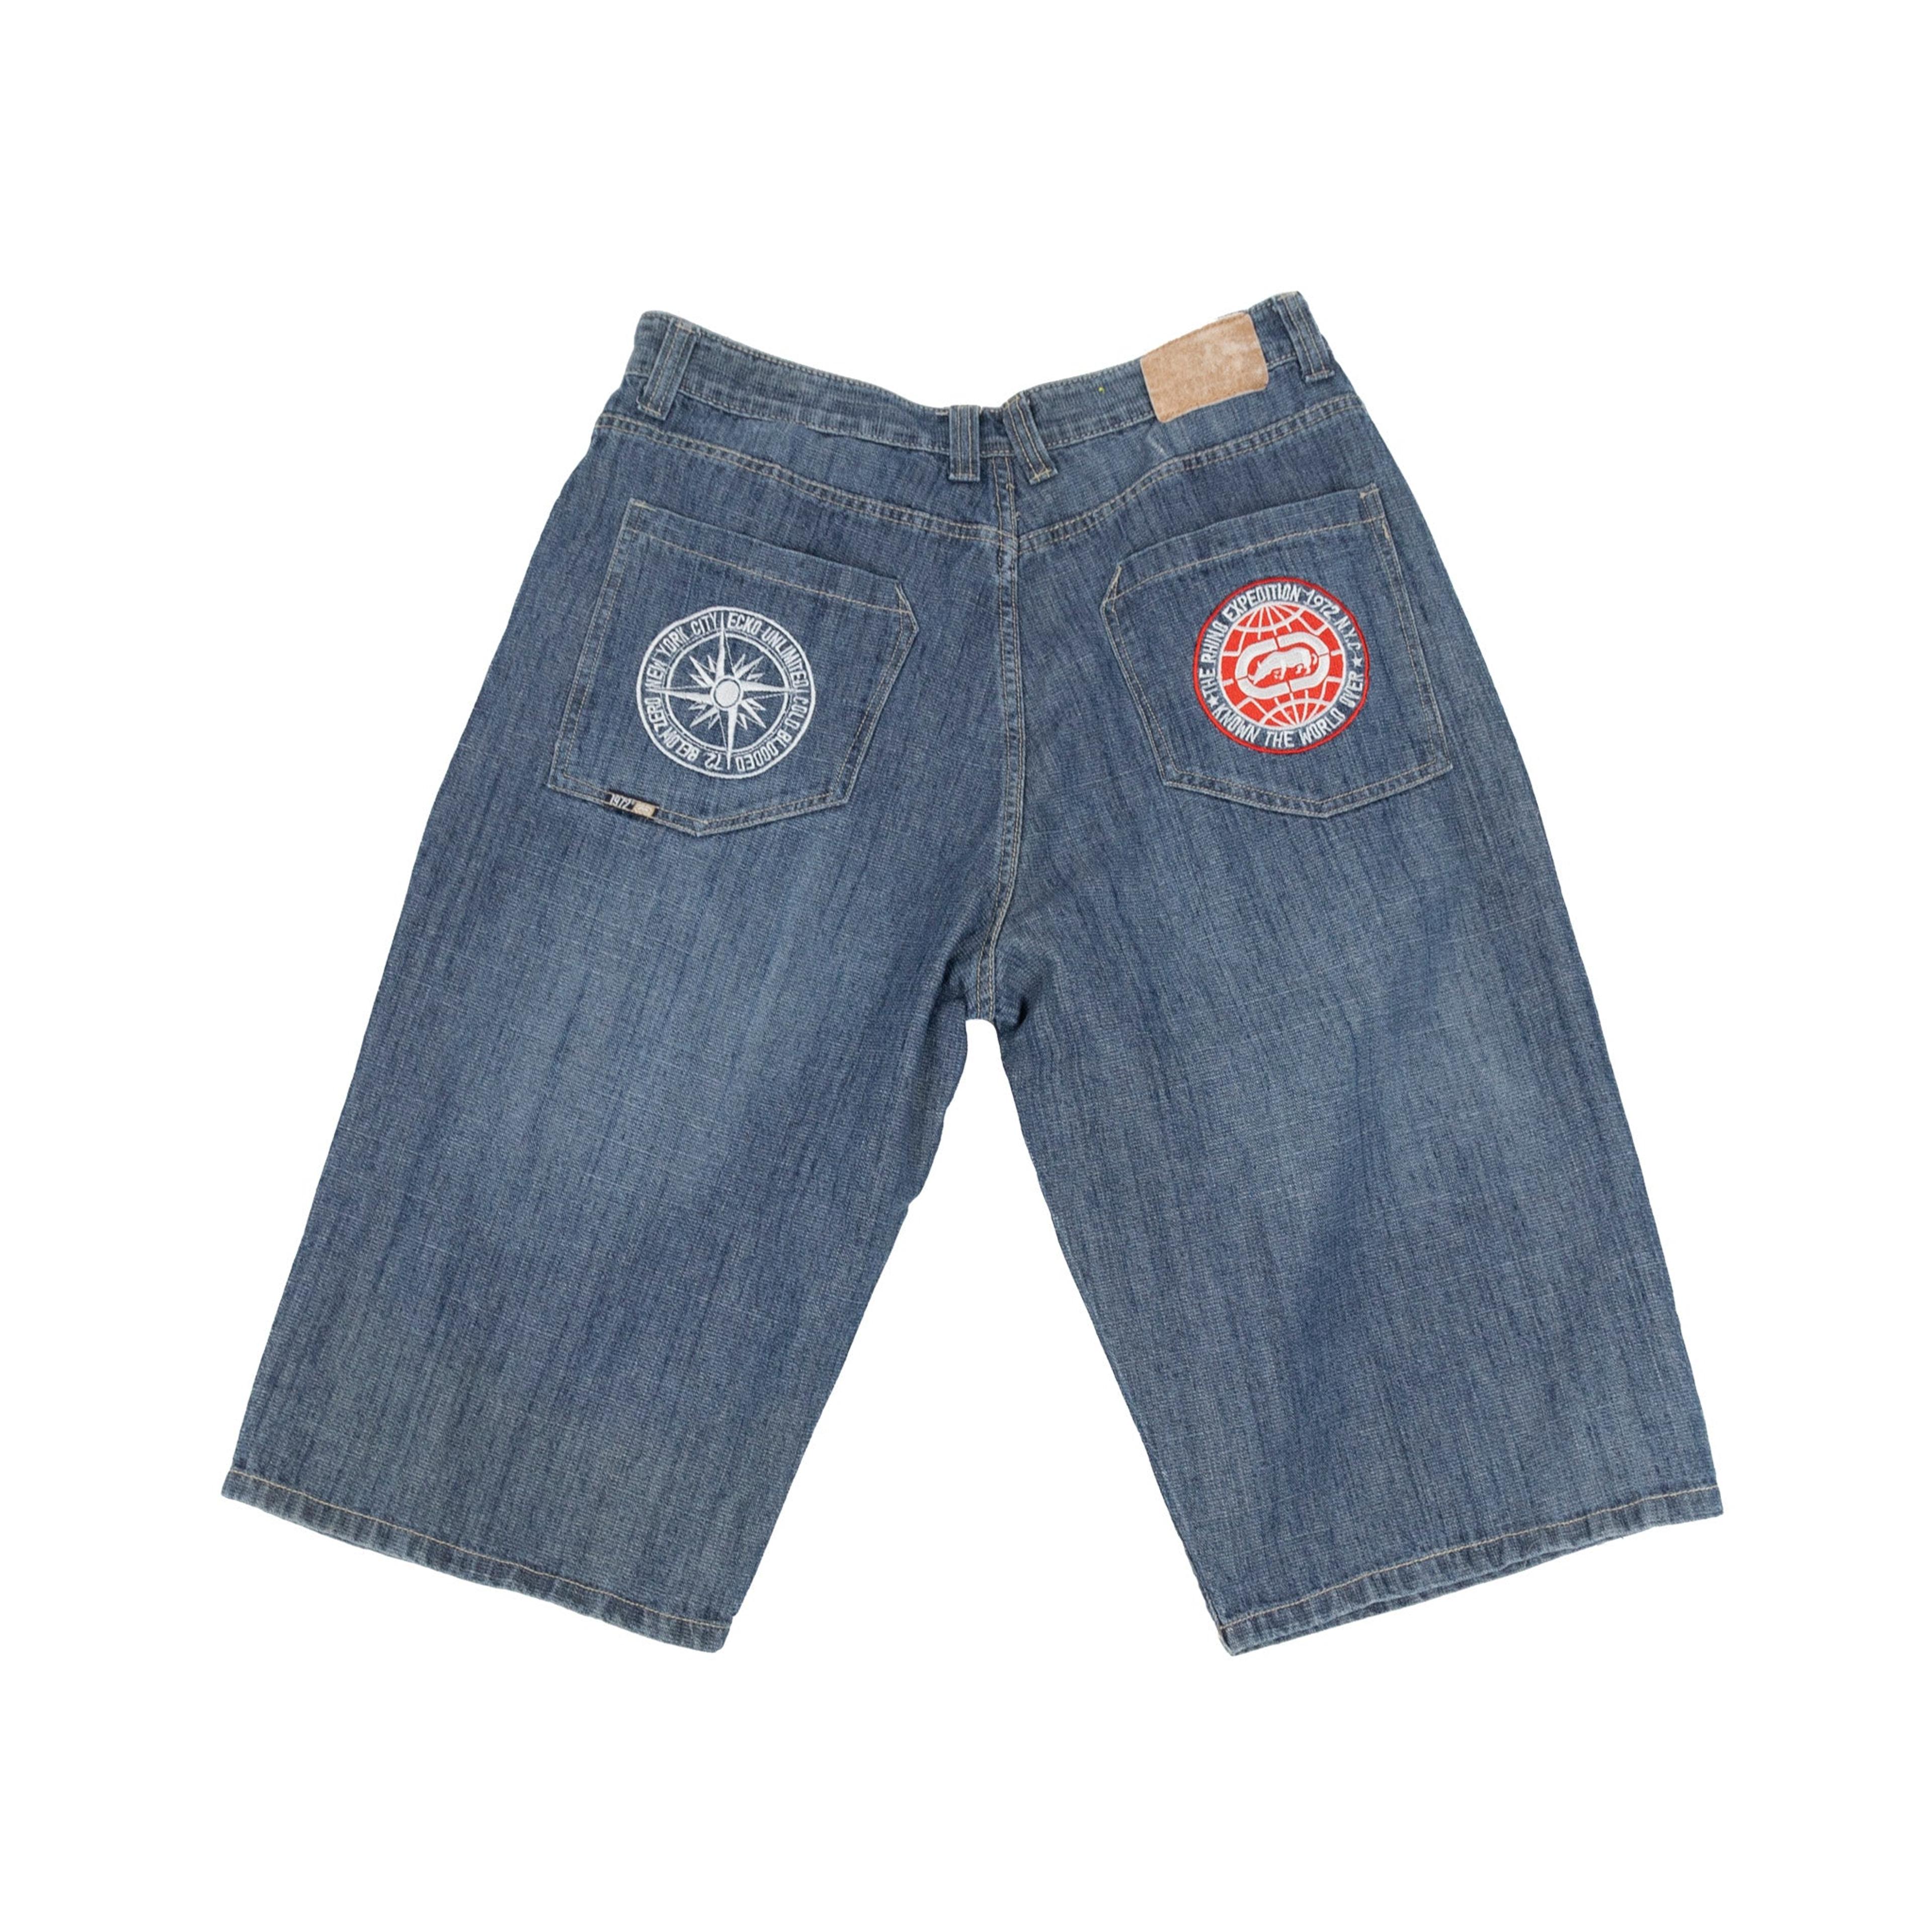 Alternate View 2 of Ecko United Expidition Baggy Fit Jorts